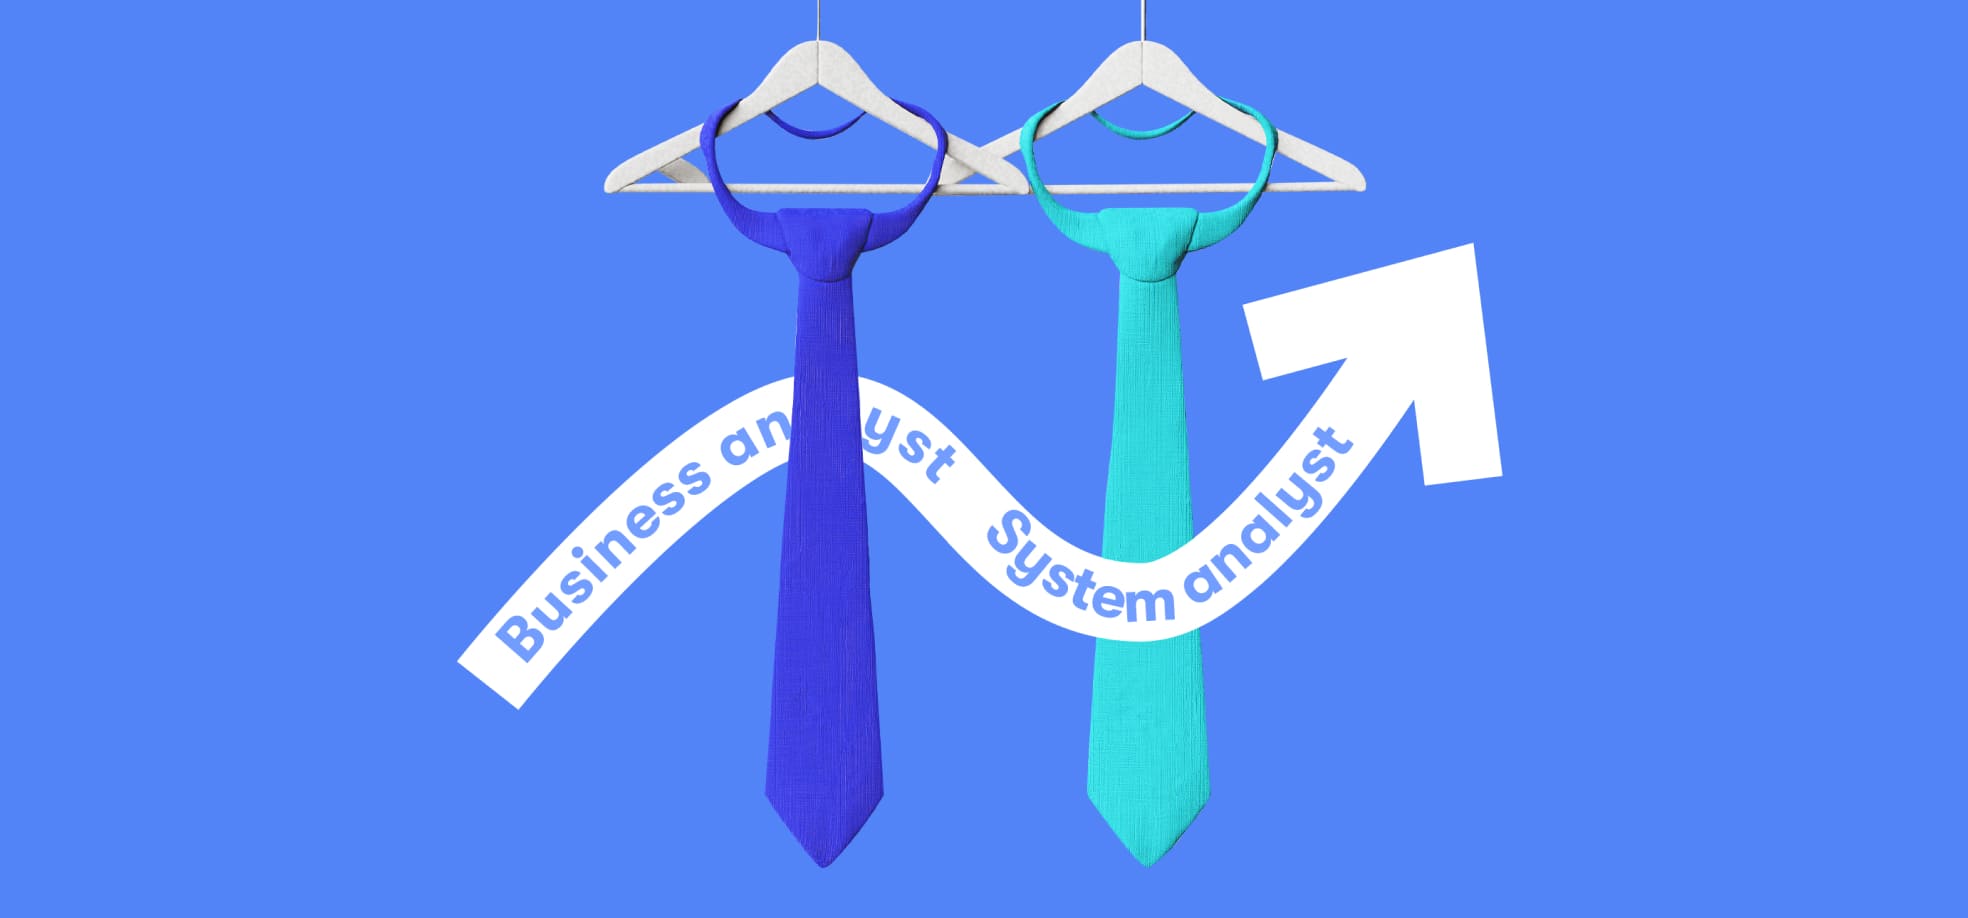 blue and green tie illustration representing a business analyst and systems analyst